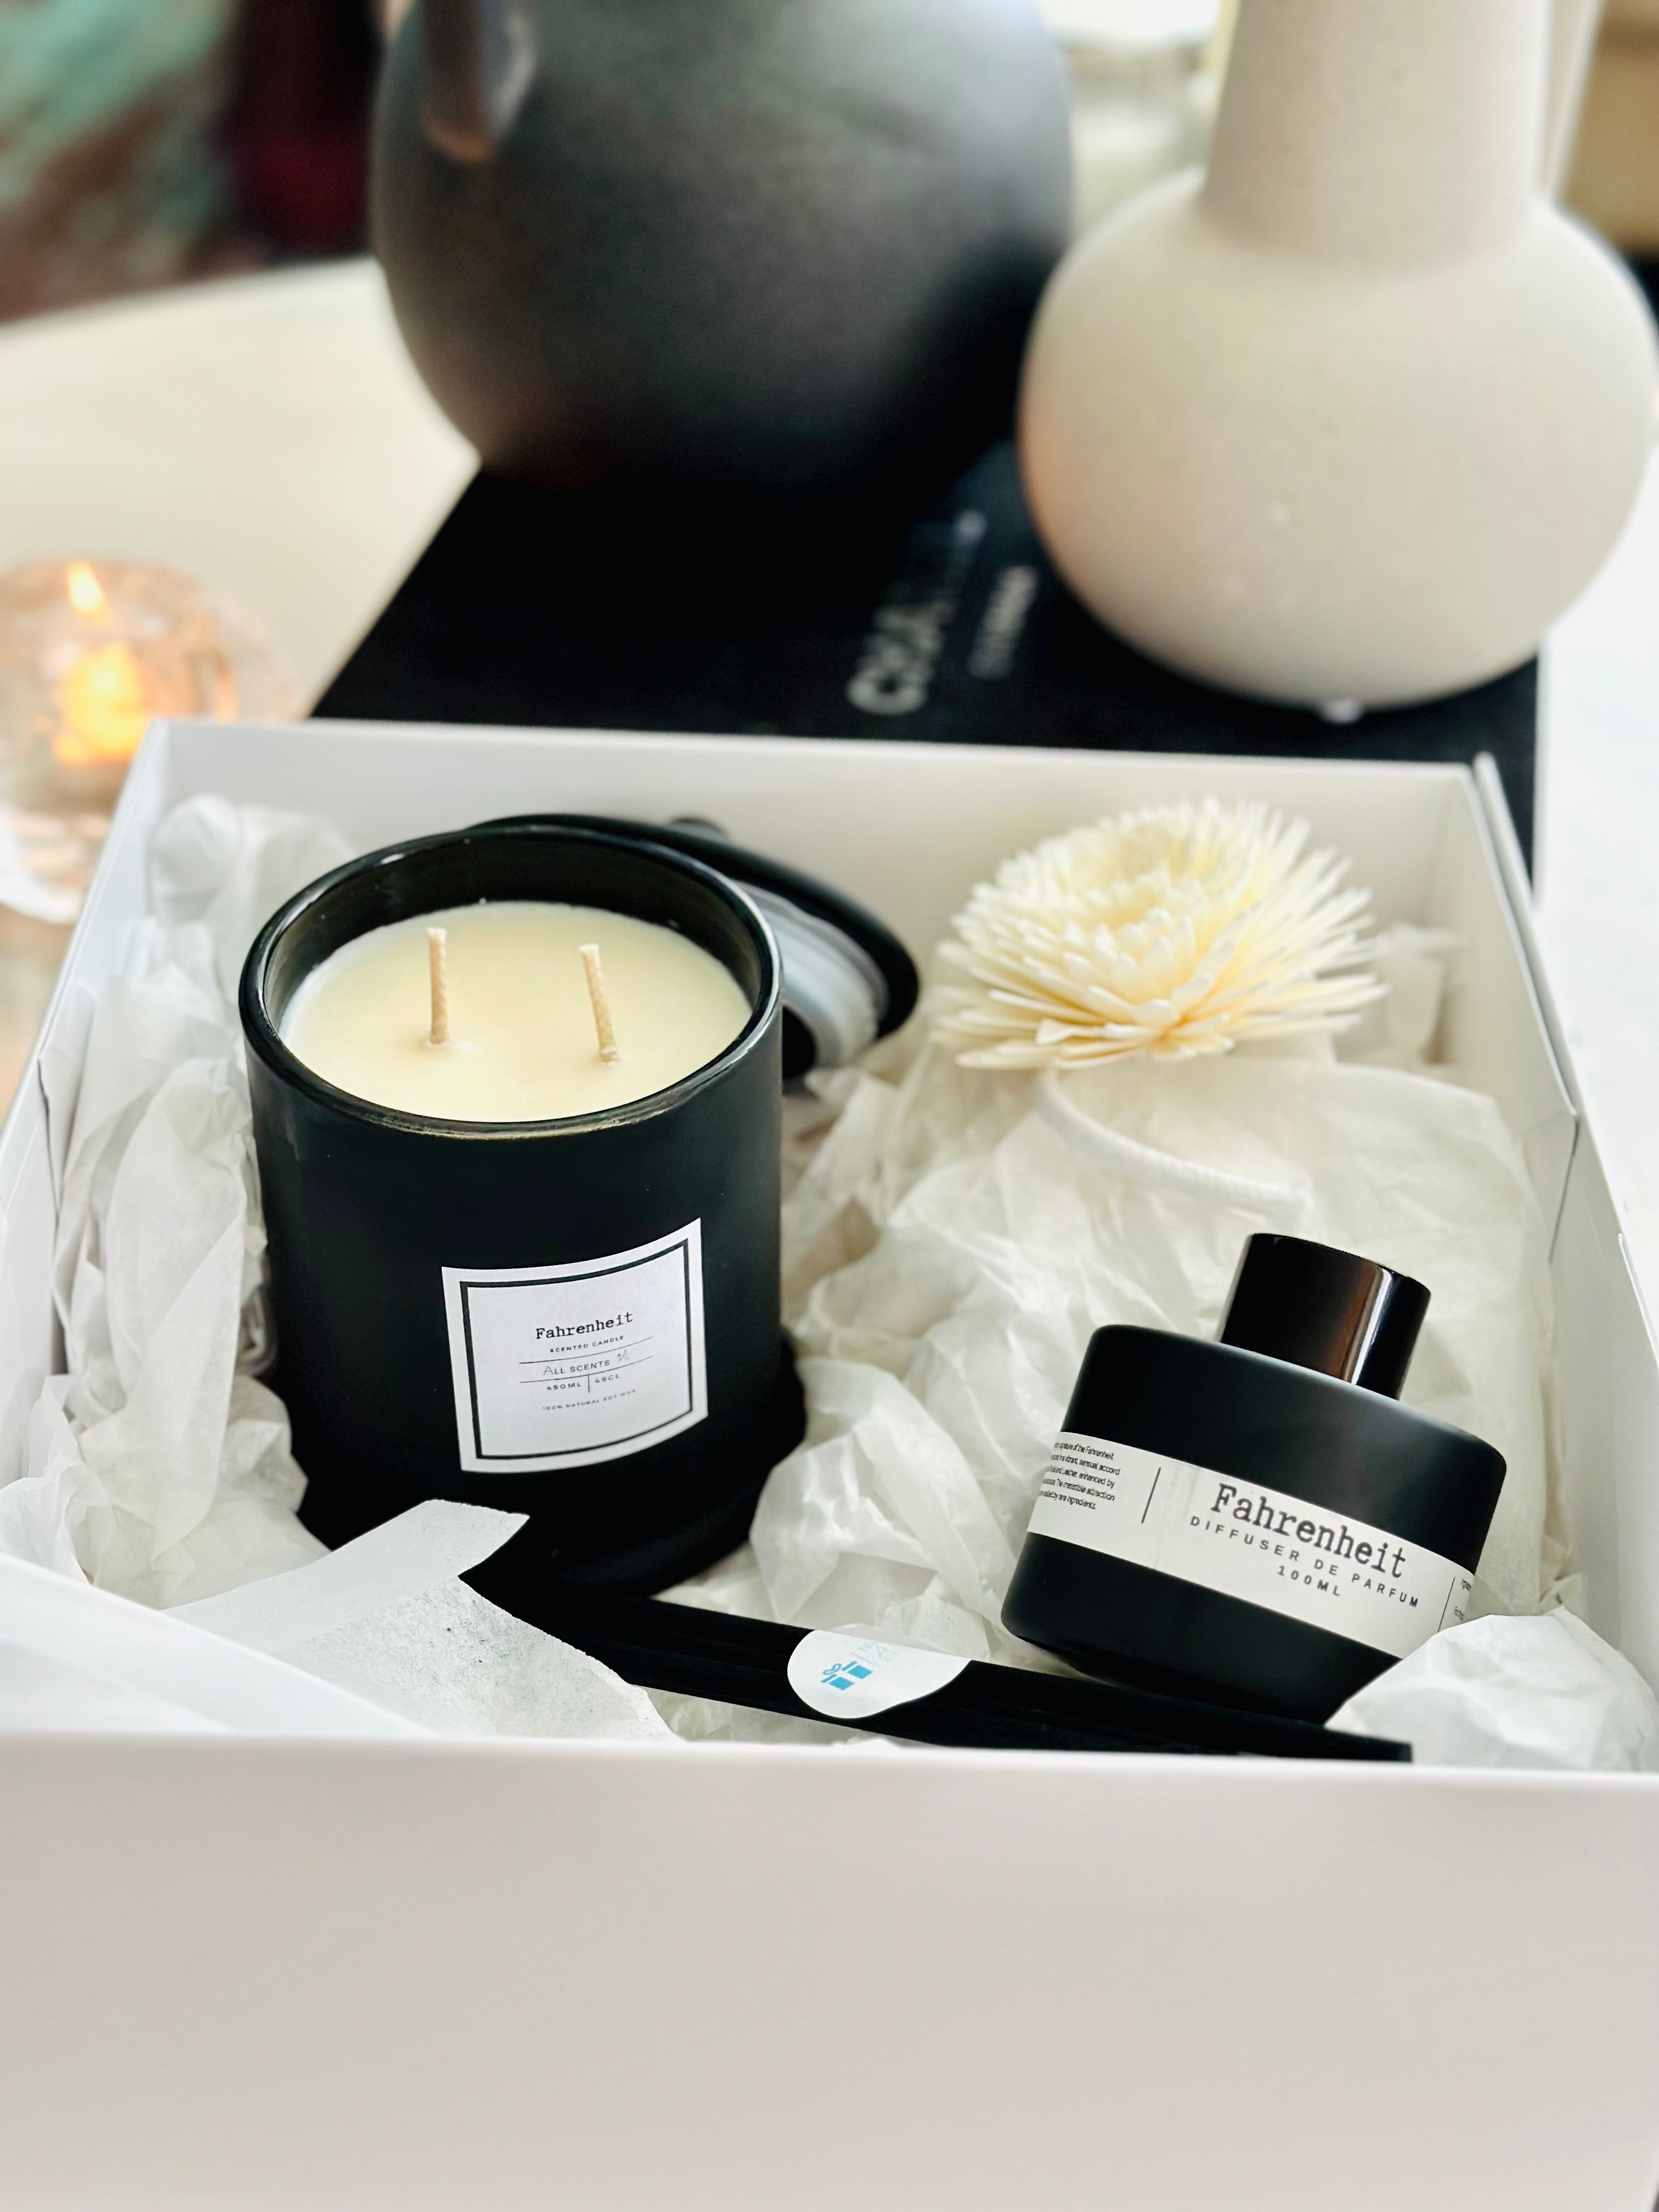 Our luxury home fragrance gift makes inspiring presents for friends and family. Our beautifully boxed gift is perfectly suited to any space or occasion.